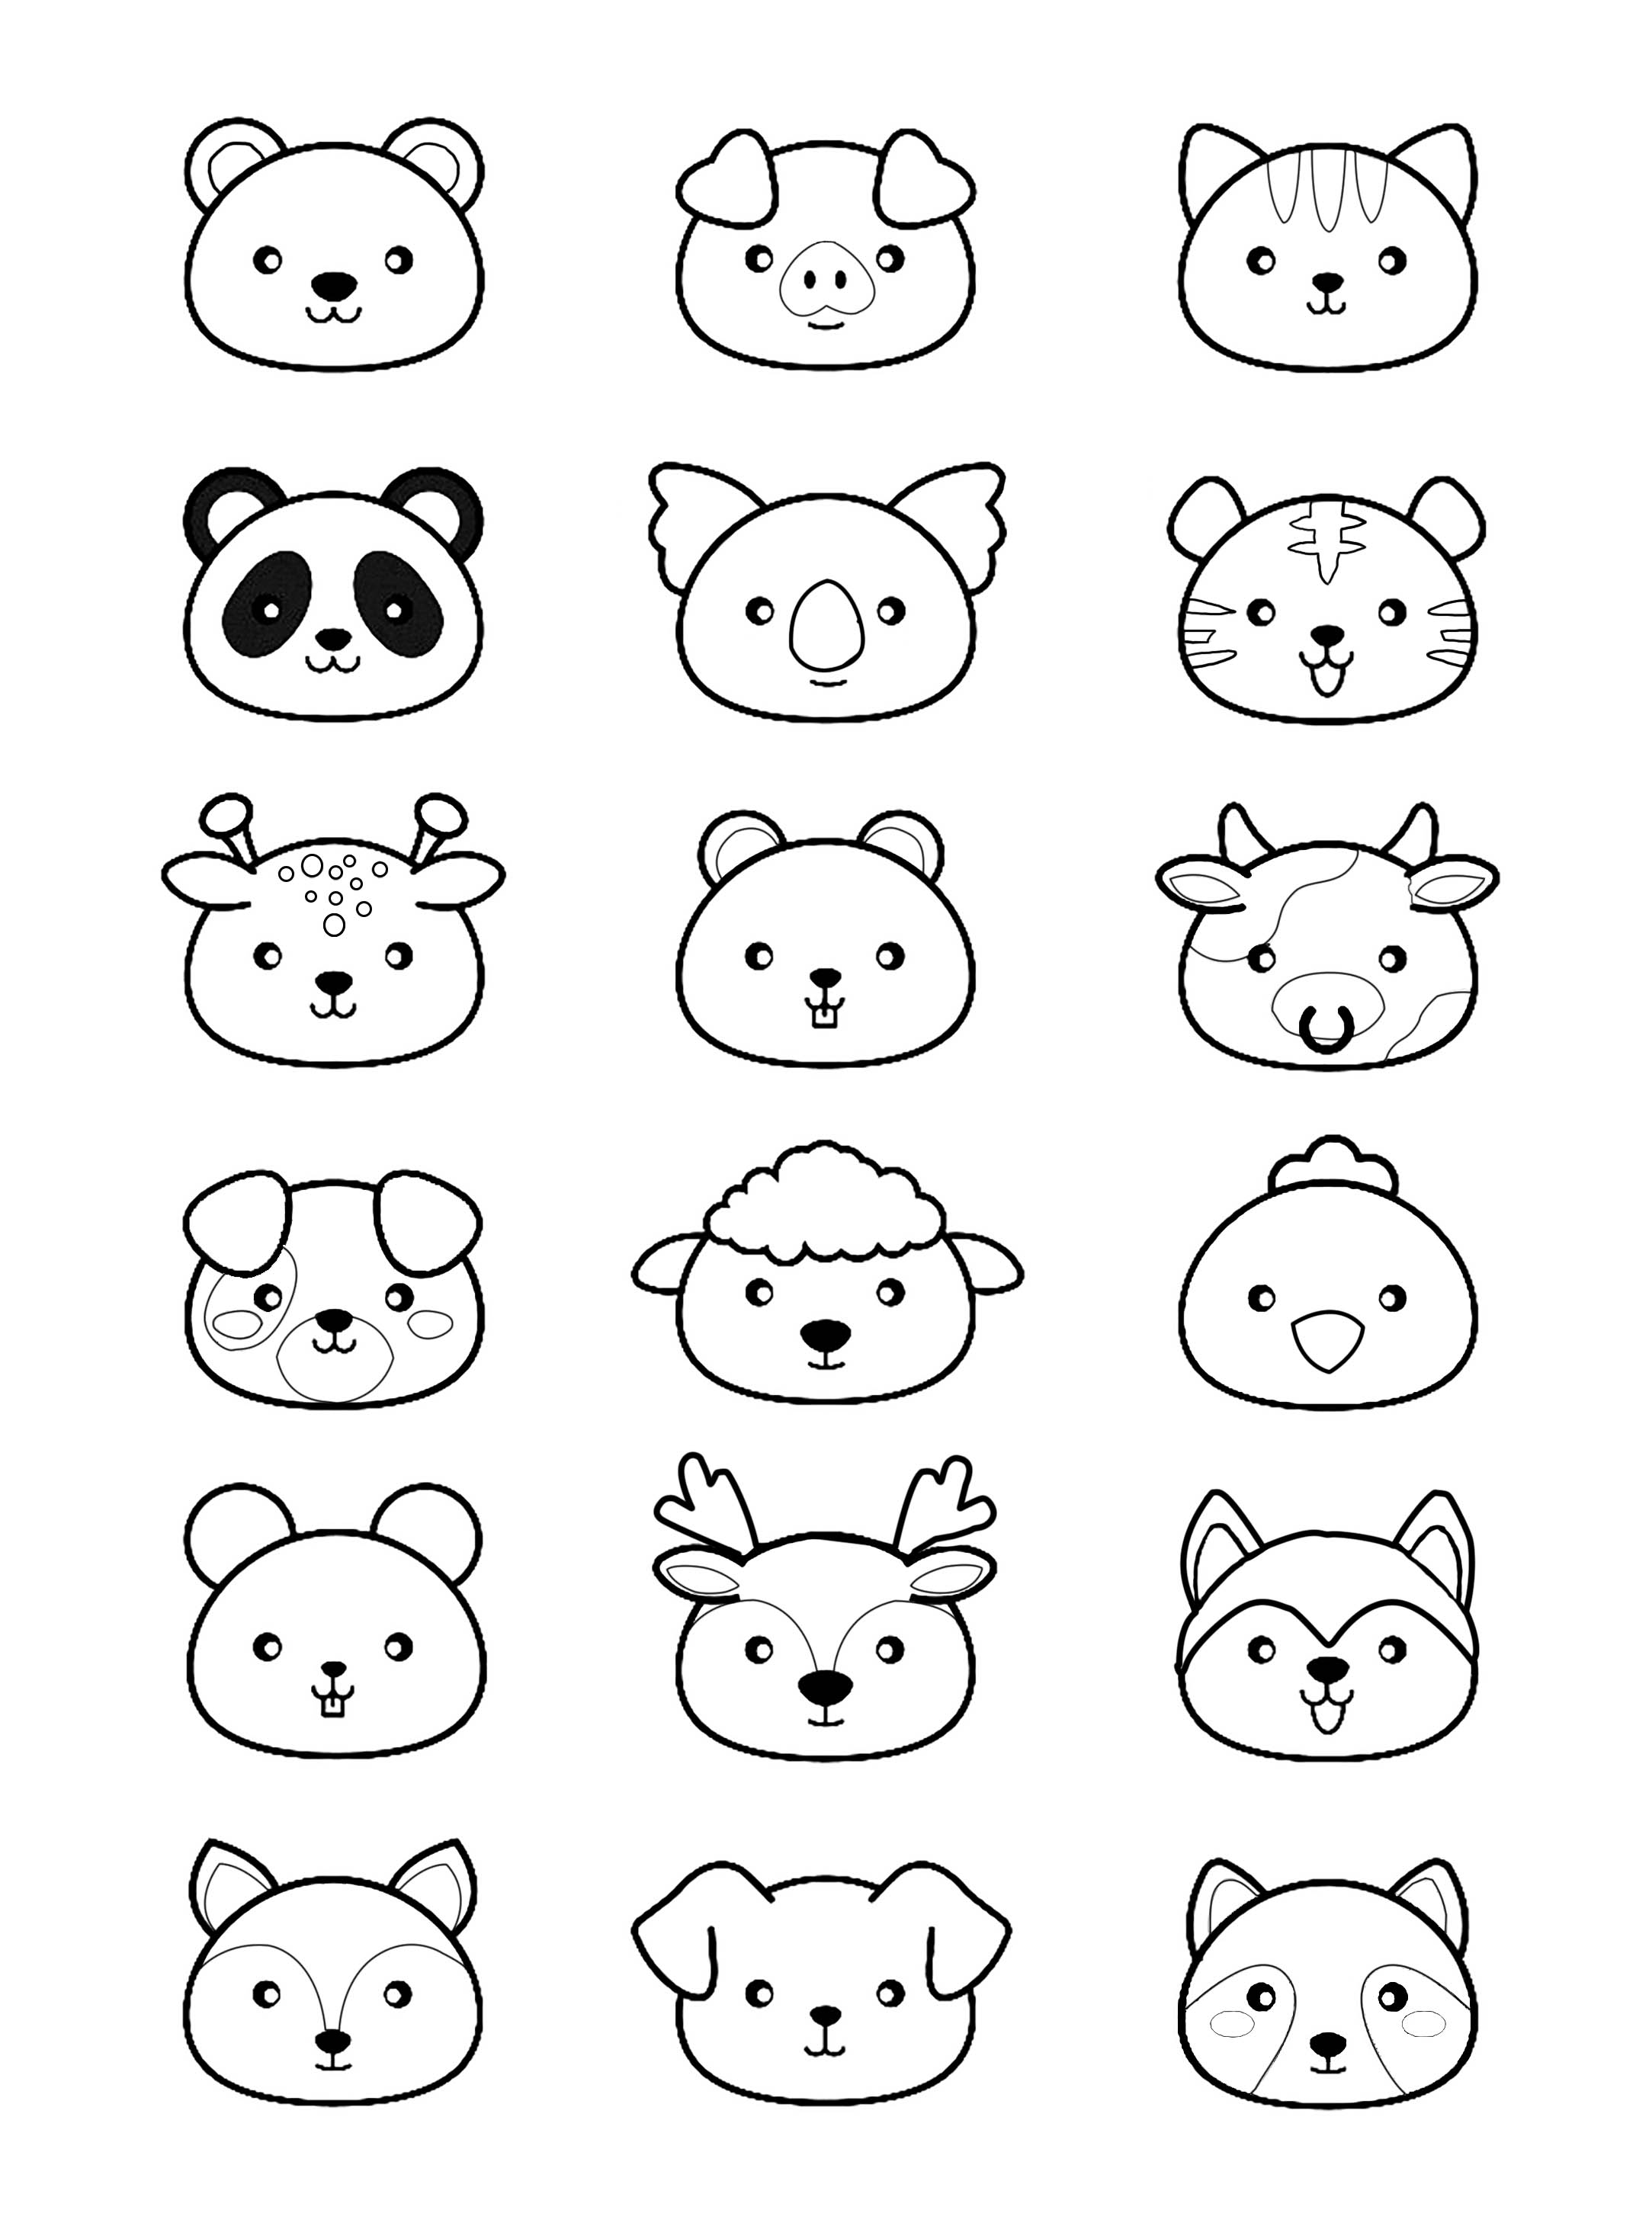 Kawaii style animal heads, to print & color : pig, cow, cat, dog, wolf, panda and more !